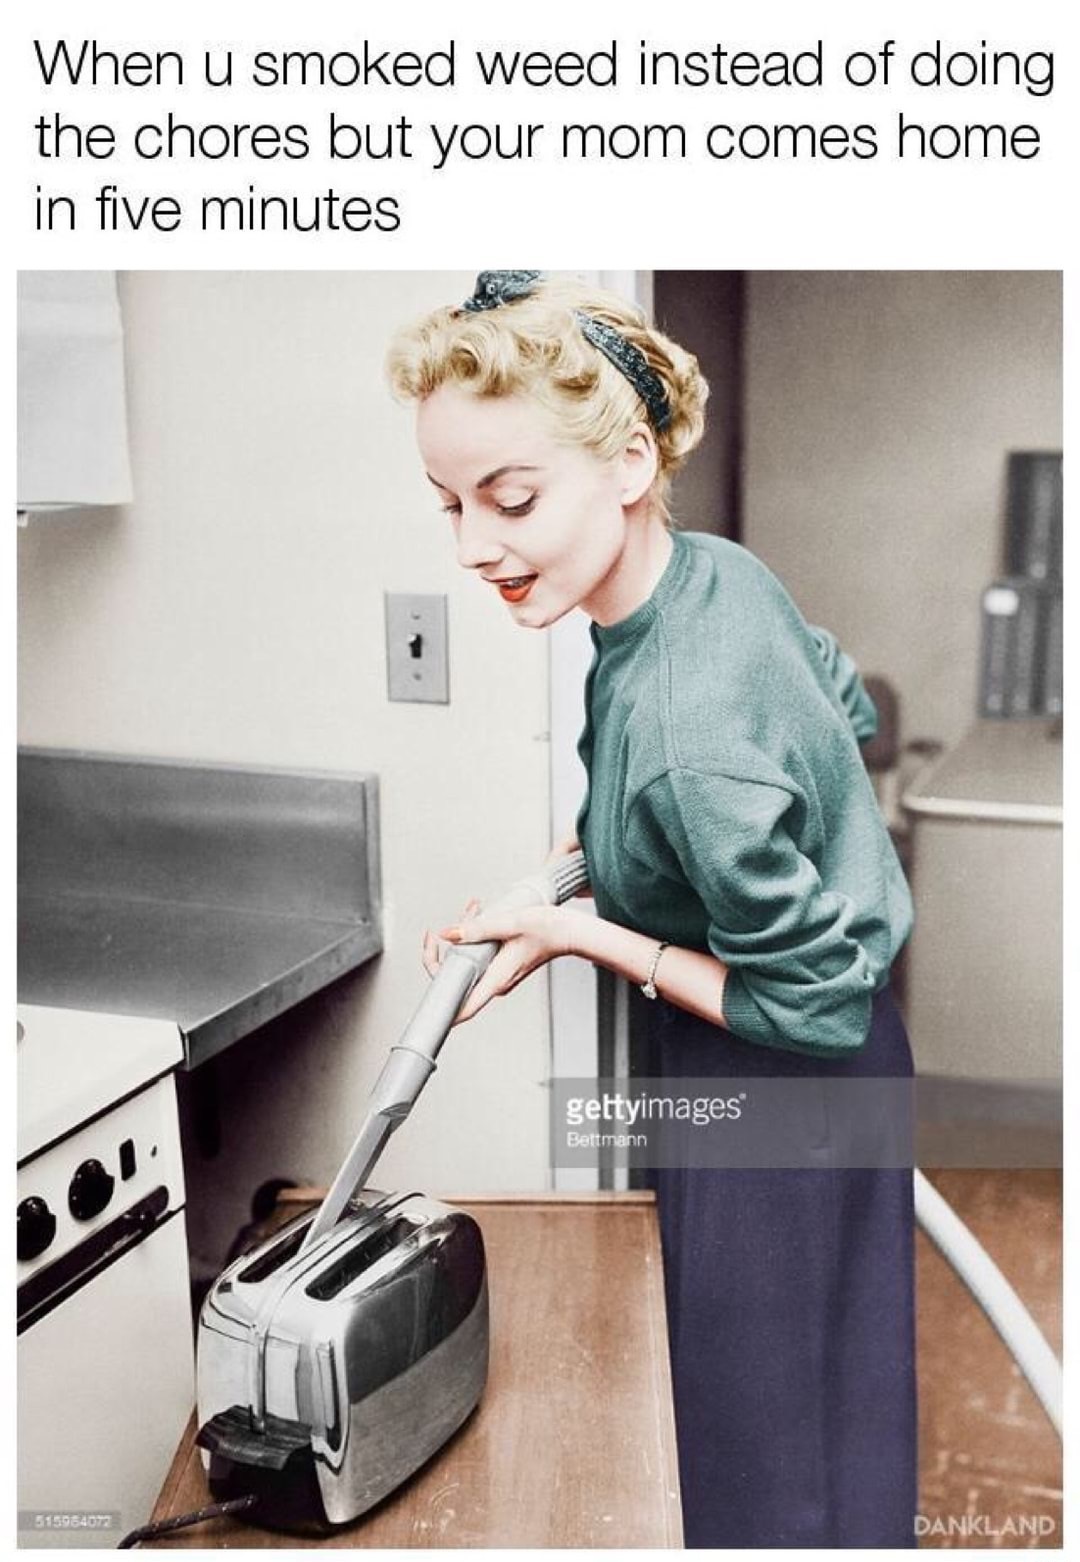 vacuuming a toaster - When u smoked weed instead of doing the chores but your mom comes home in five minutes gettyimages Bettmann 515964077 Dankland